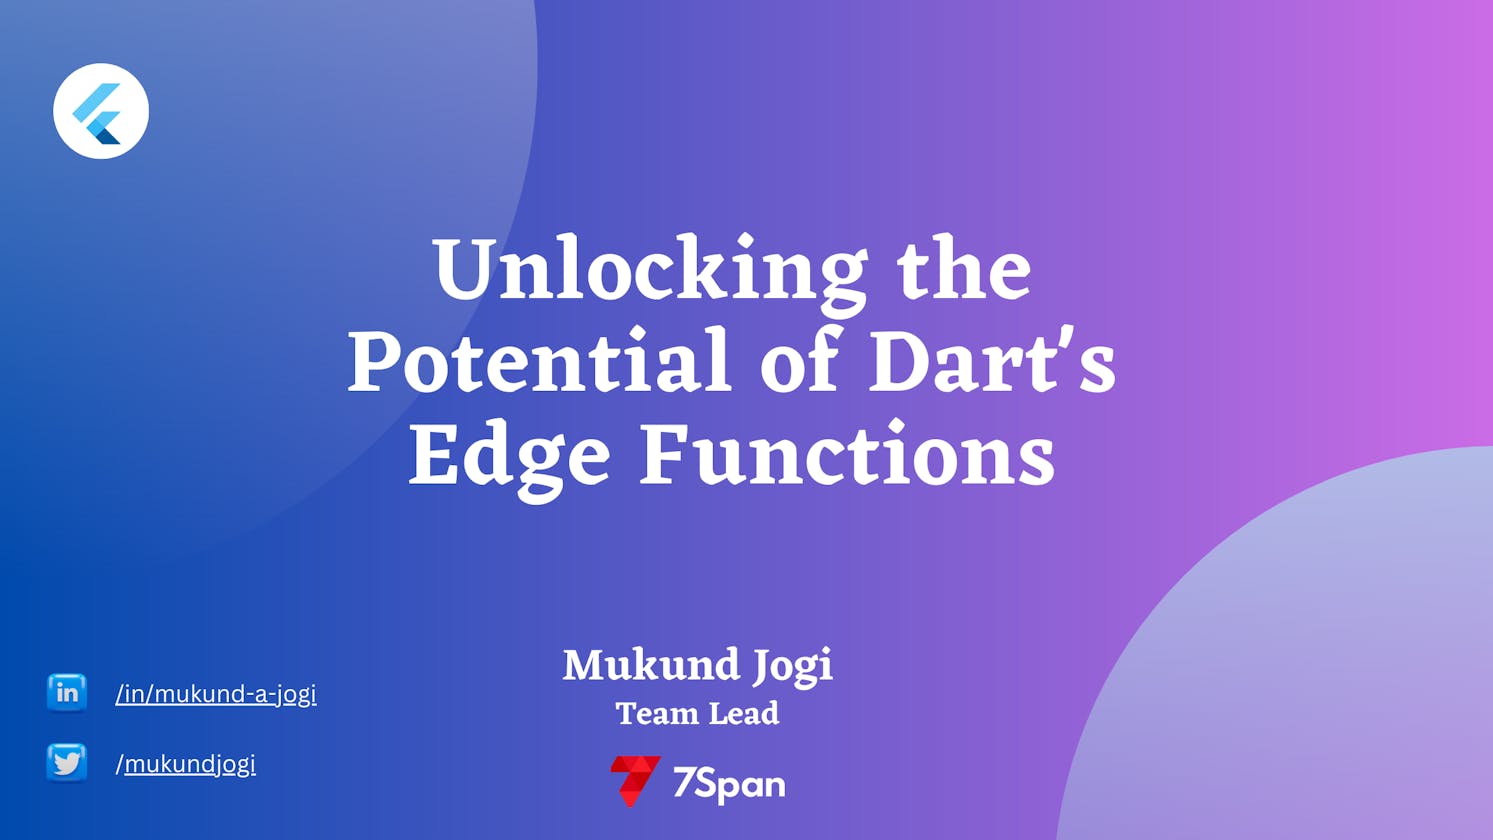 Unlocking the Potential of Dart's Edge Functions